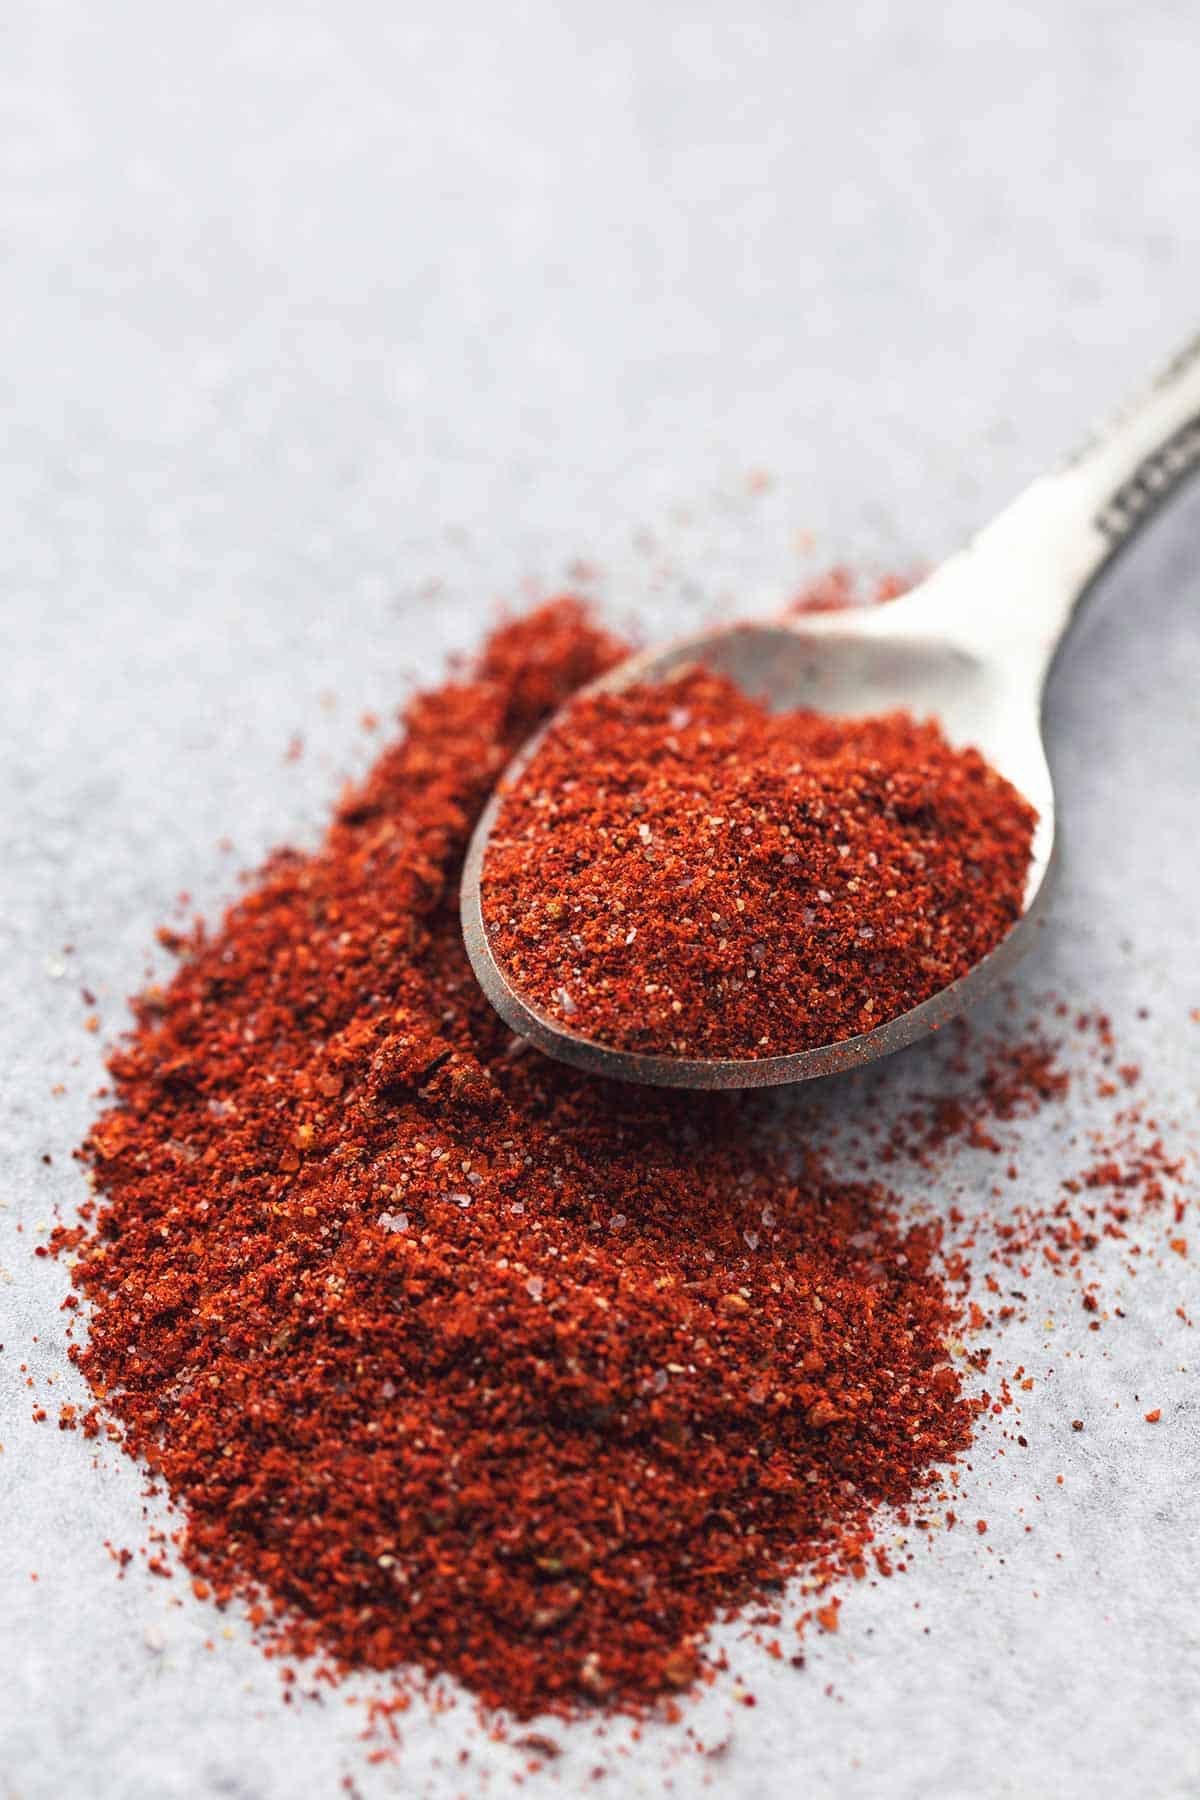 spice mix on table with spoon